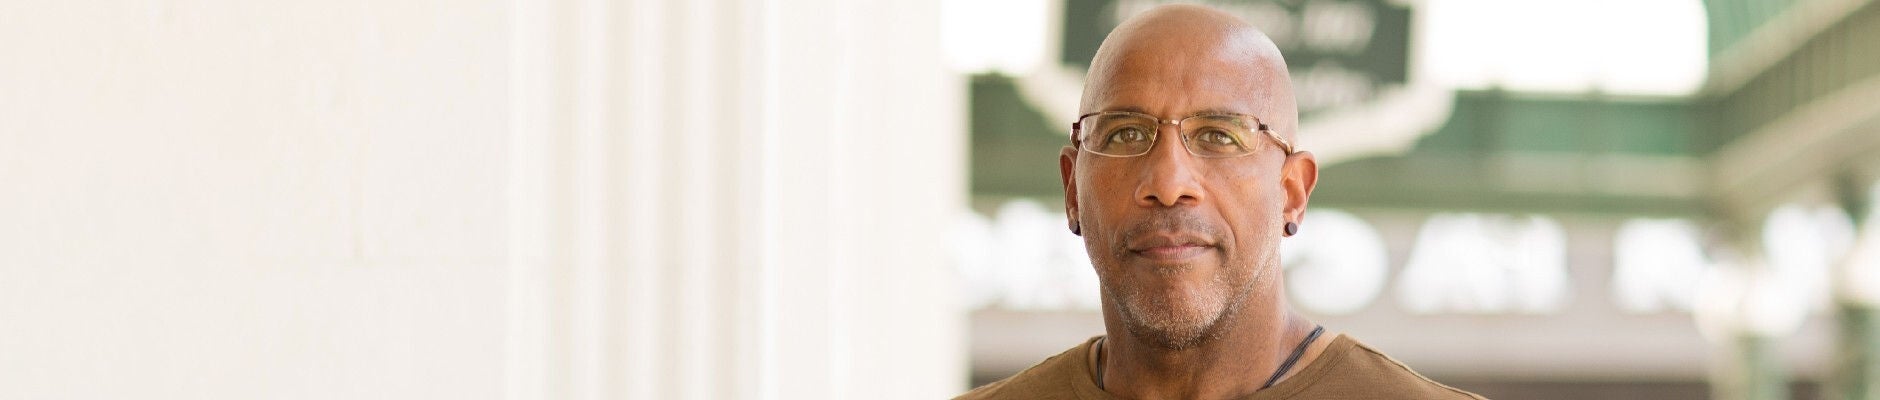 Bald, African American man wearing glasses and a brown shirt.